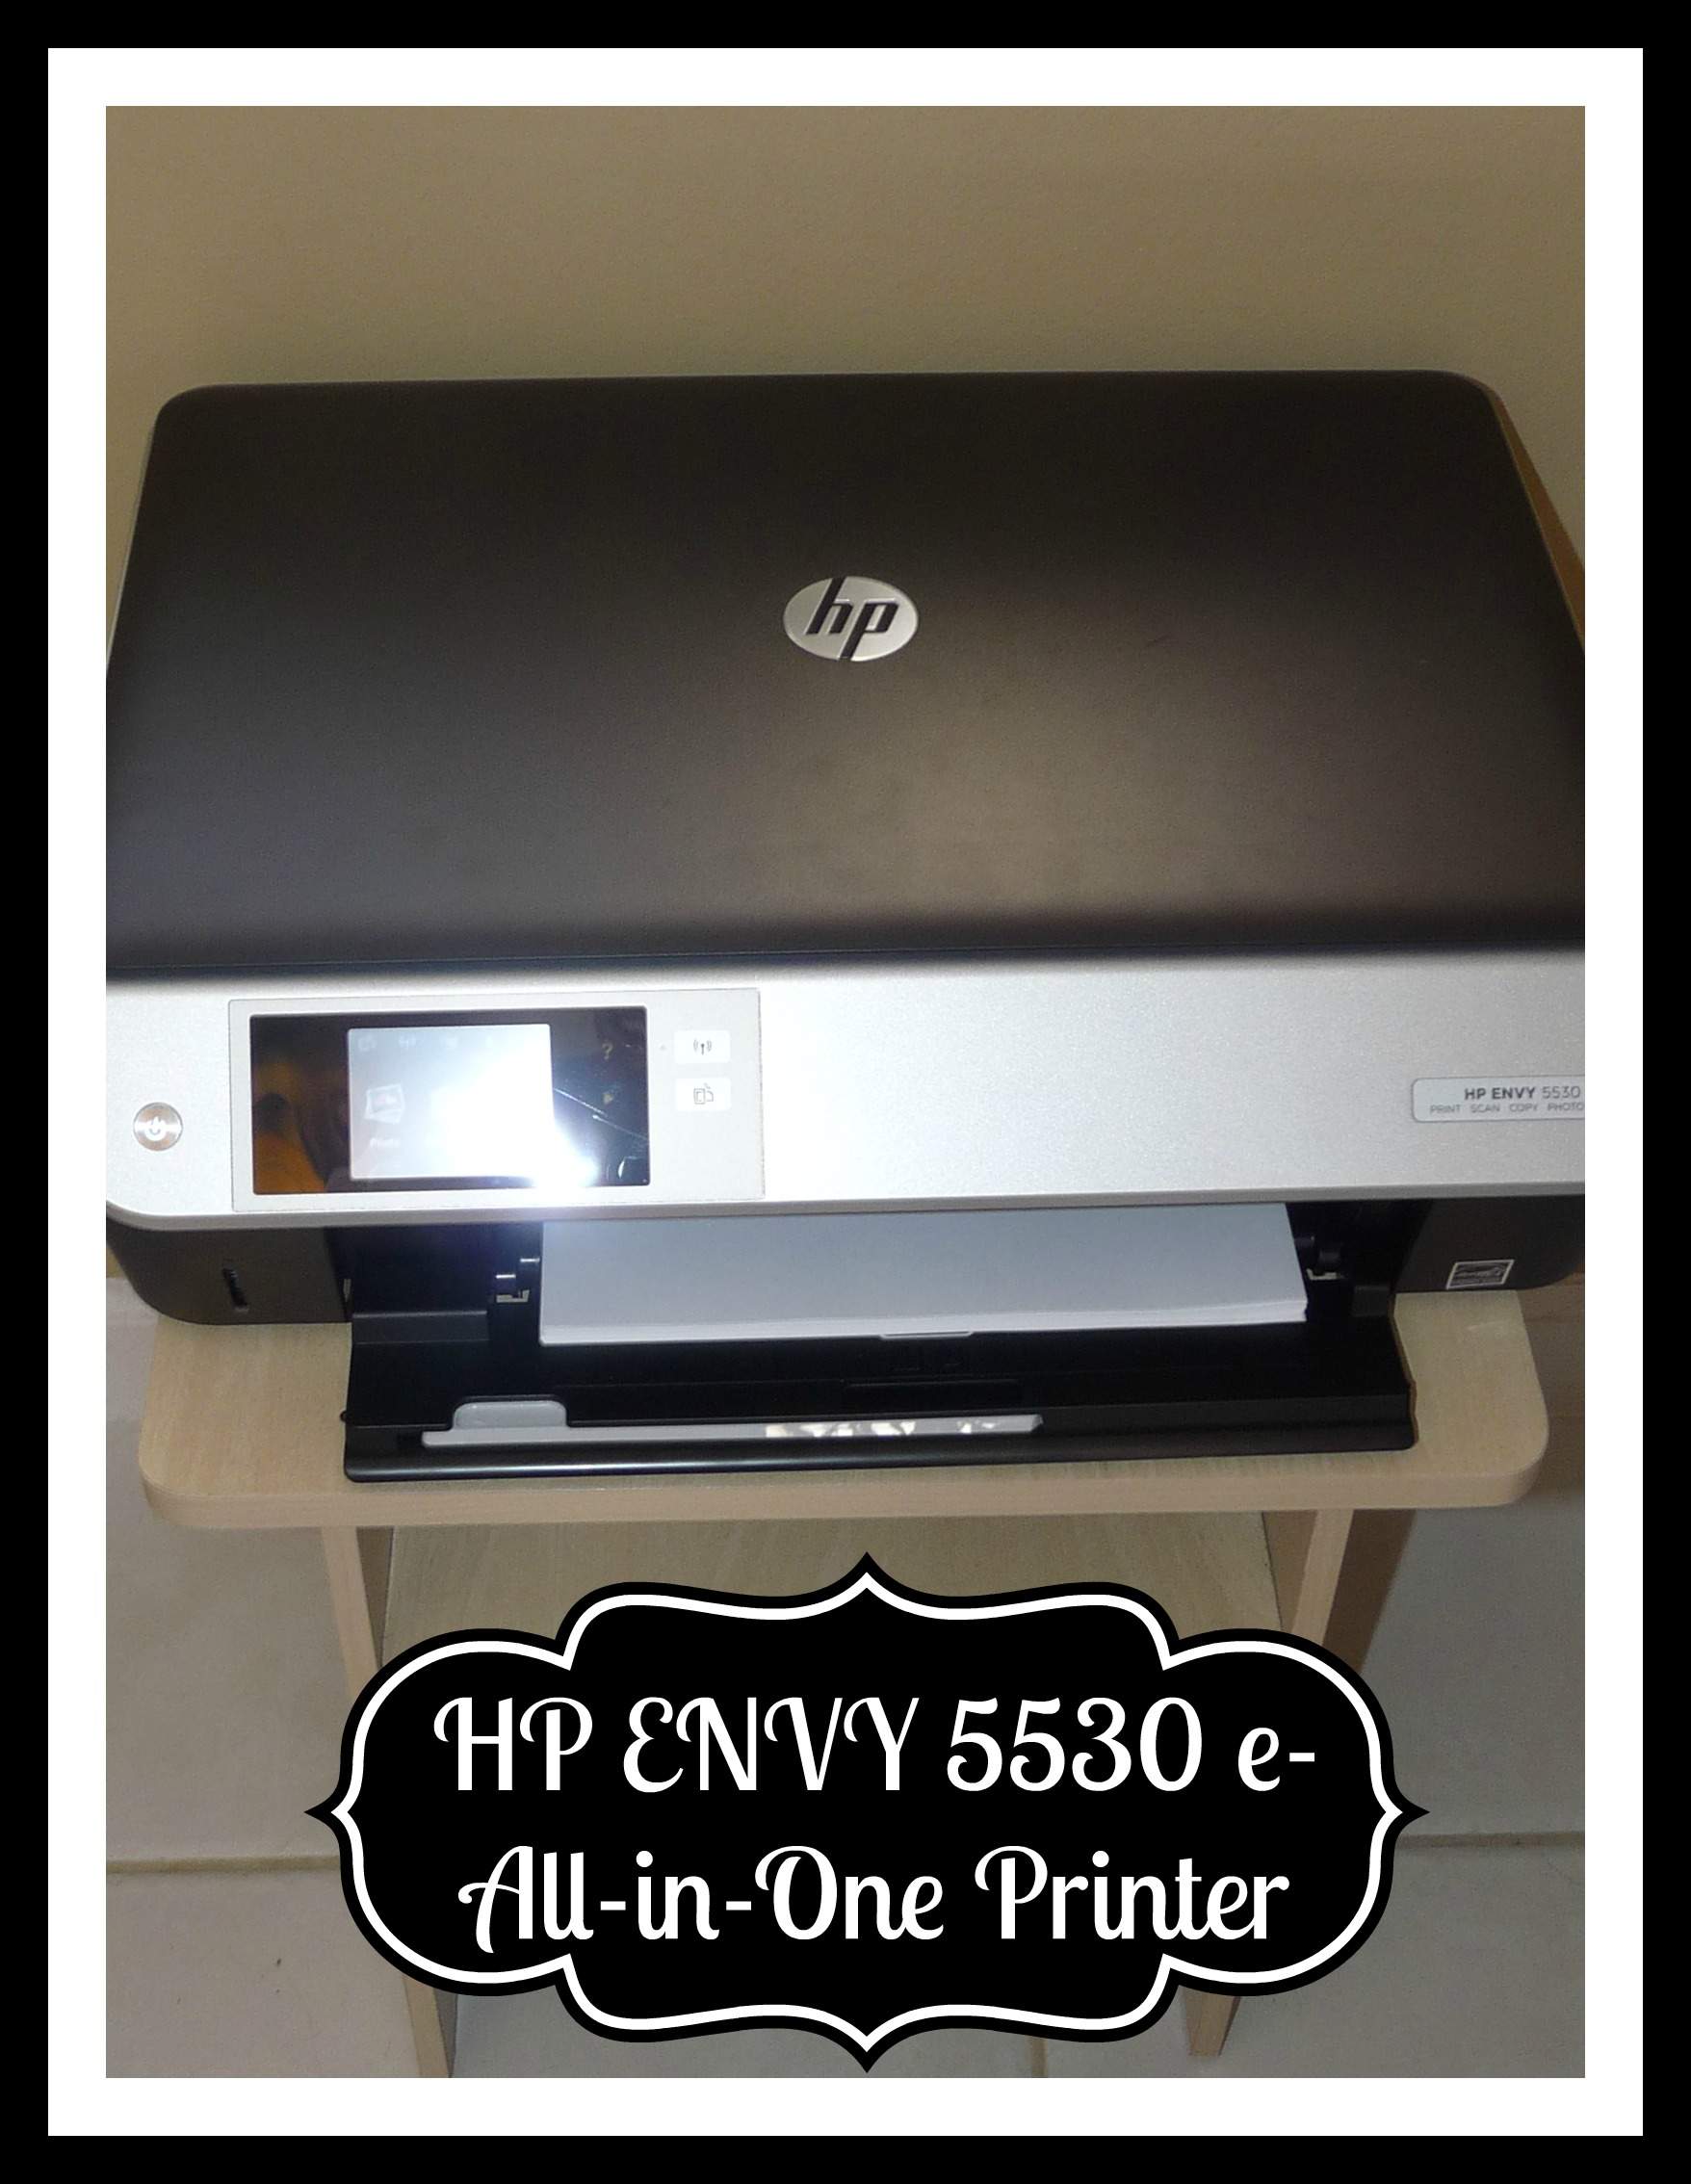 HP Envy 5530 All in One Printer #Giveaway - BB Product Reviews